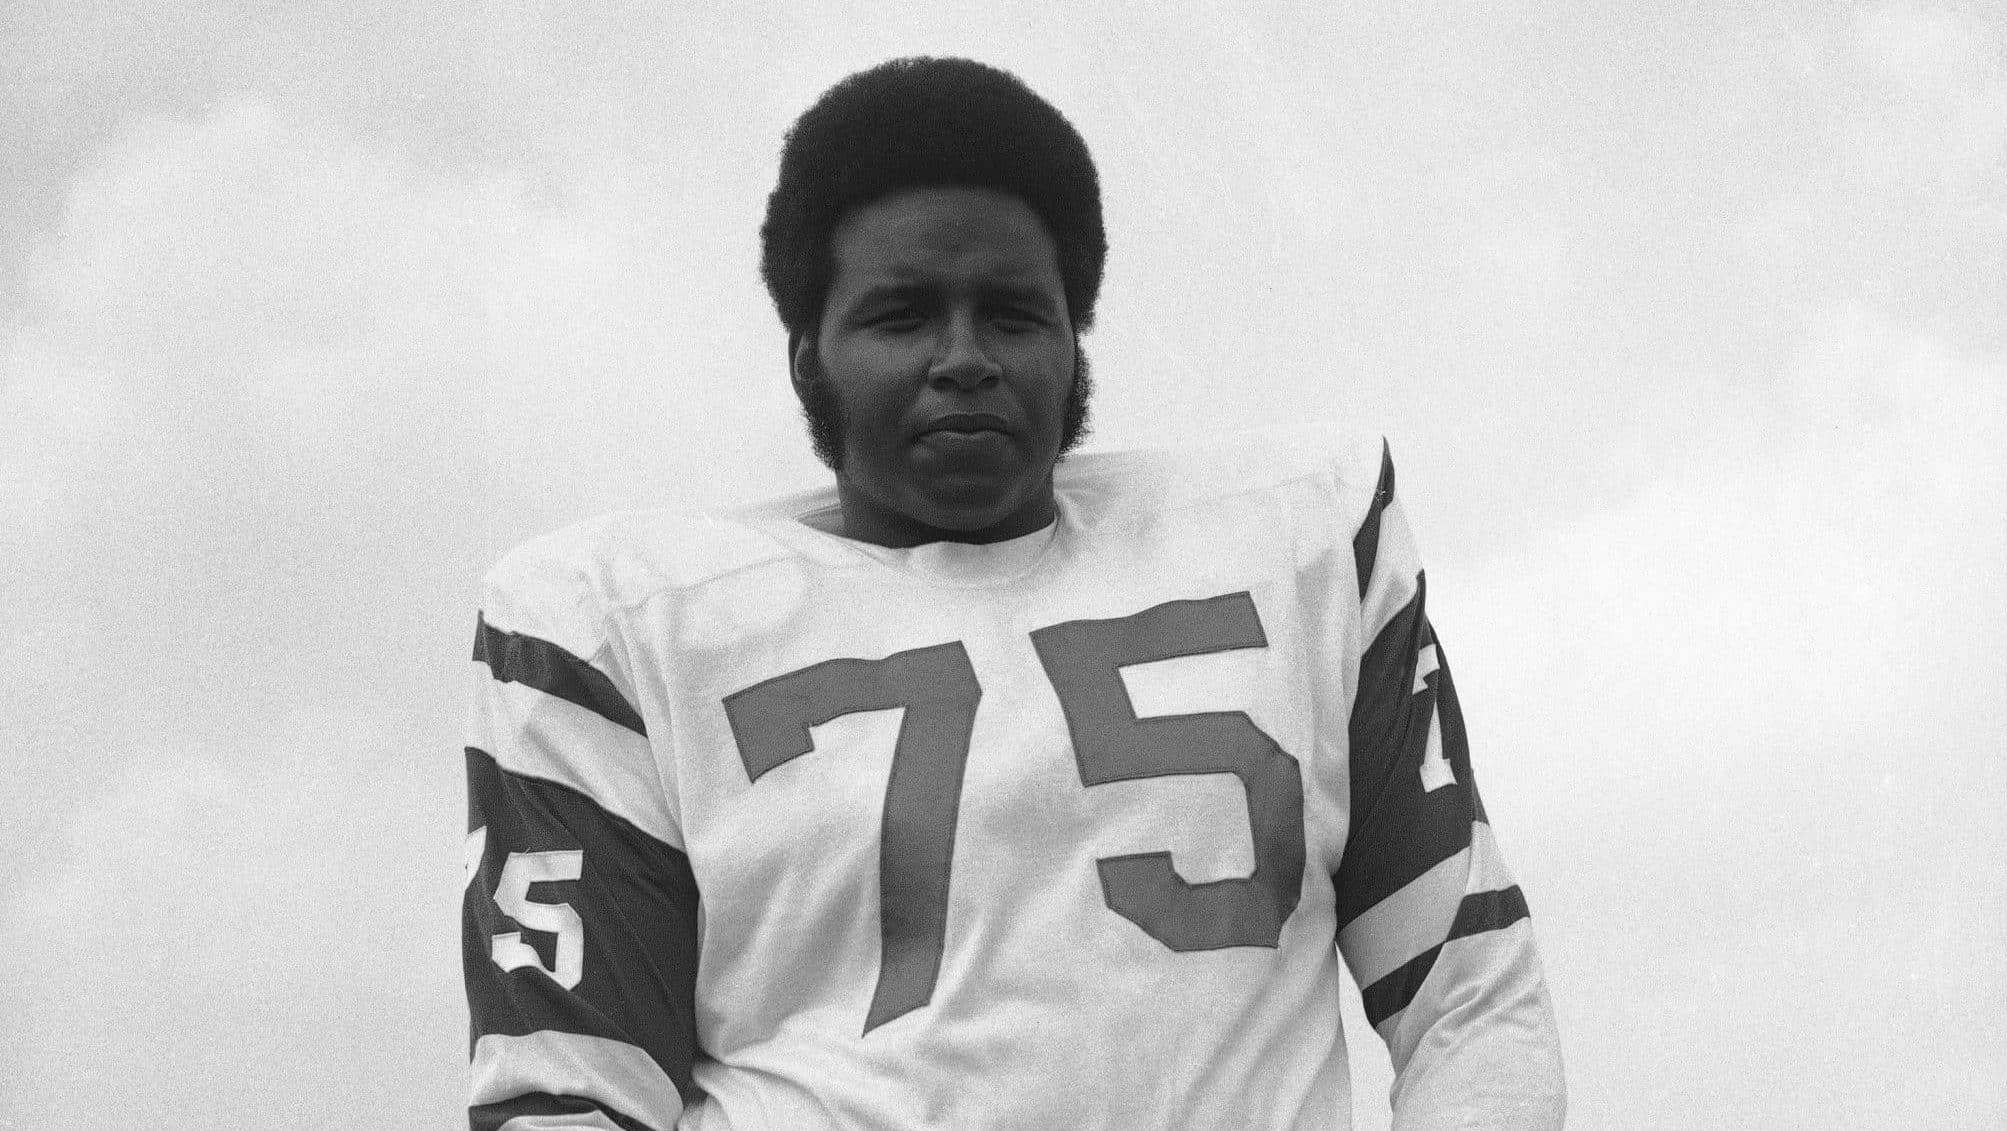 FILE- This July 17, 1972, file photo shows, Winston Hill of the New York Jets. Hill, a durable Pro Bowl offensive tackle who helped protect Joe Namath on the way to the New York Jets' Super Bowl victory in 1969, has died. He was 74. The team announced Tuesday, April 26, 2016, that Hill died in his adopted hometown of Denver.